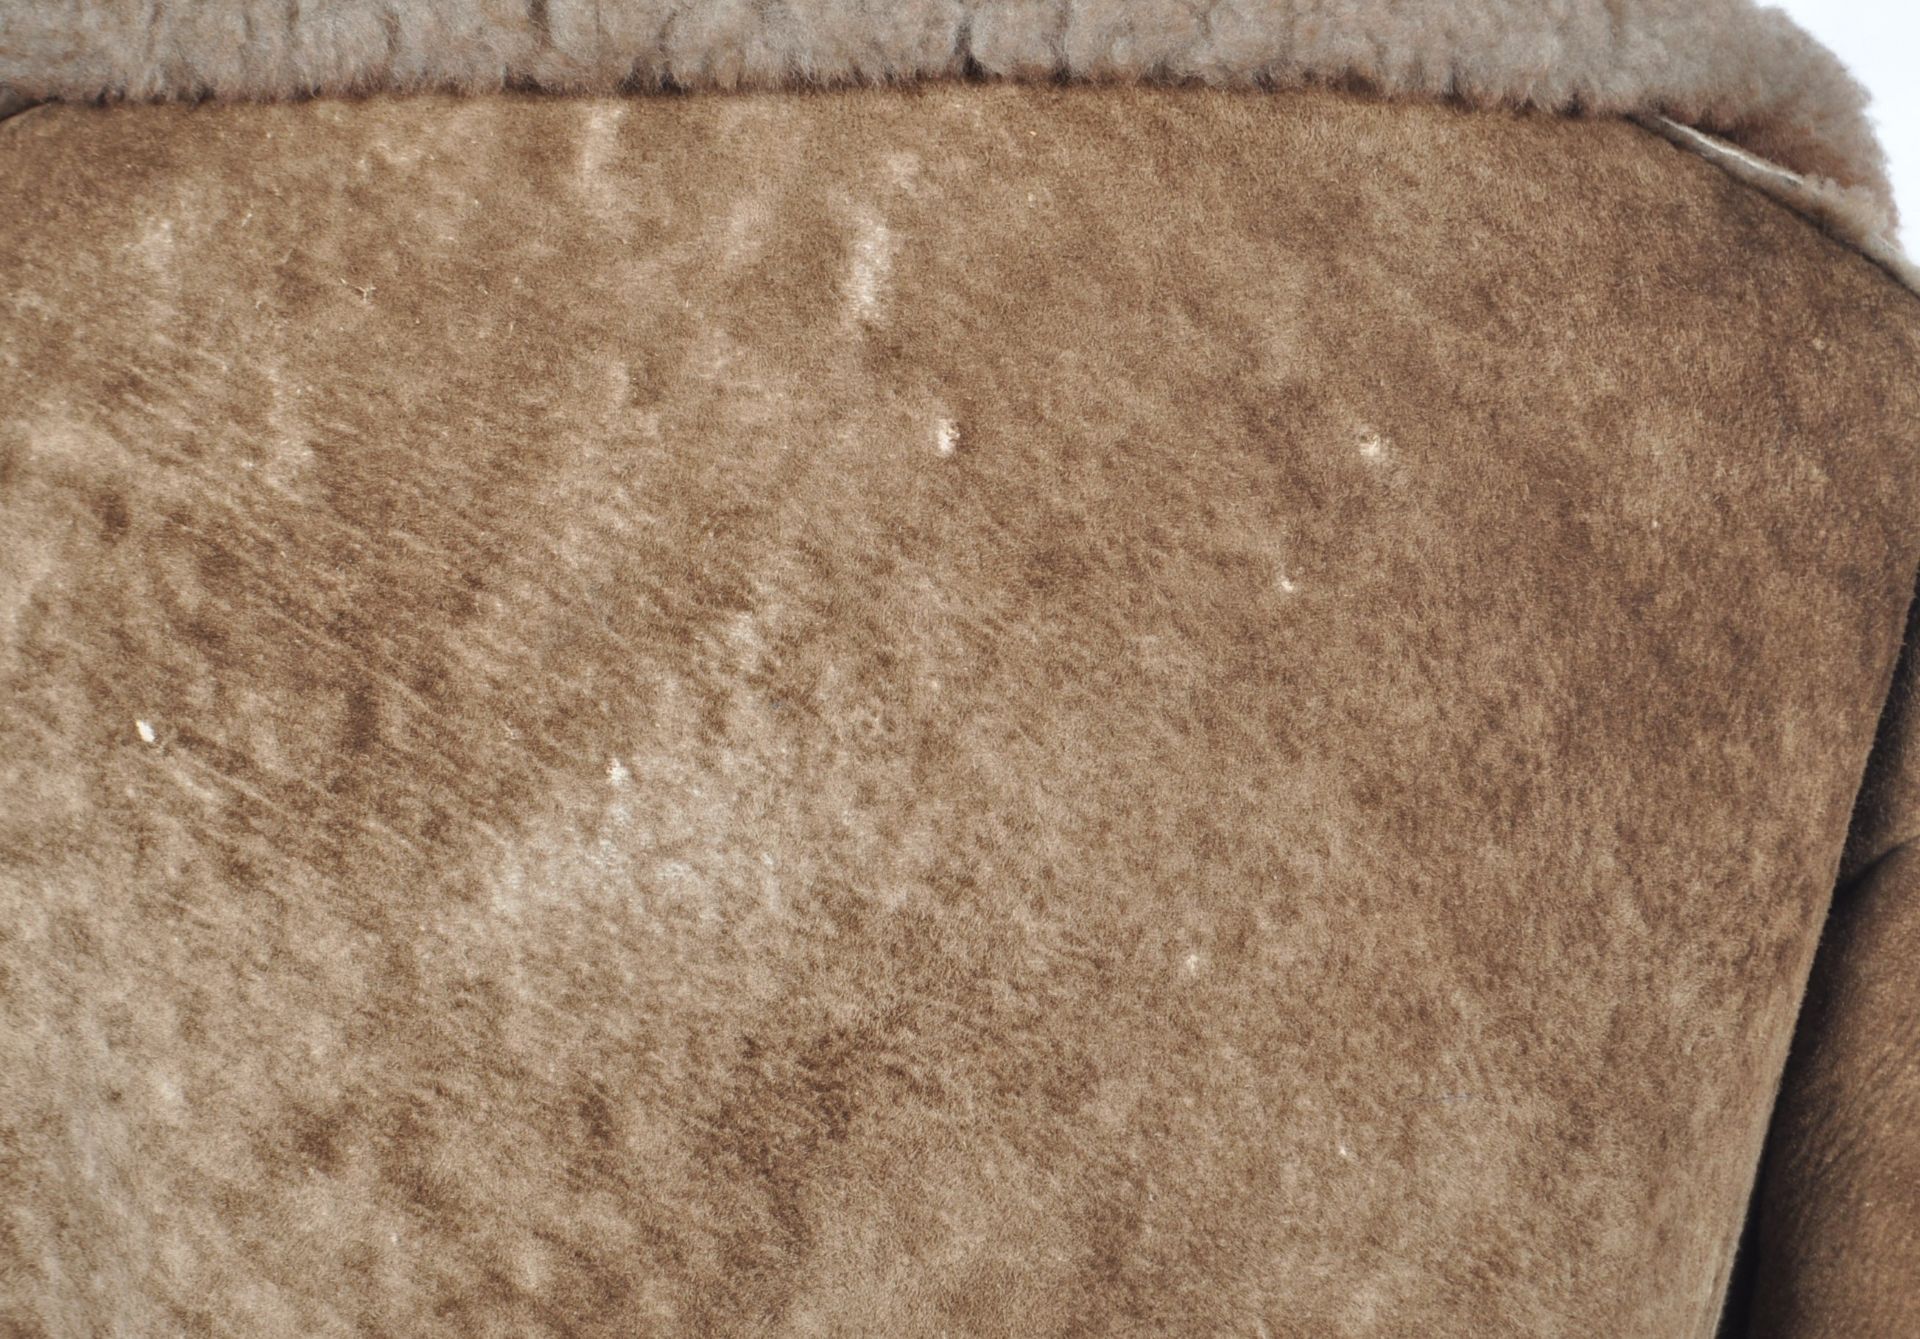 ESTATE OF DAVE PROWSE - 1970S SHEEPSKIN COAT AS WORN BY MR PROWSE - Image 5 of 7